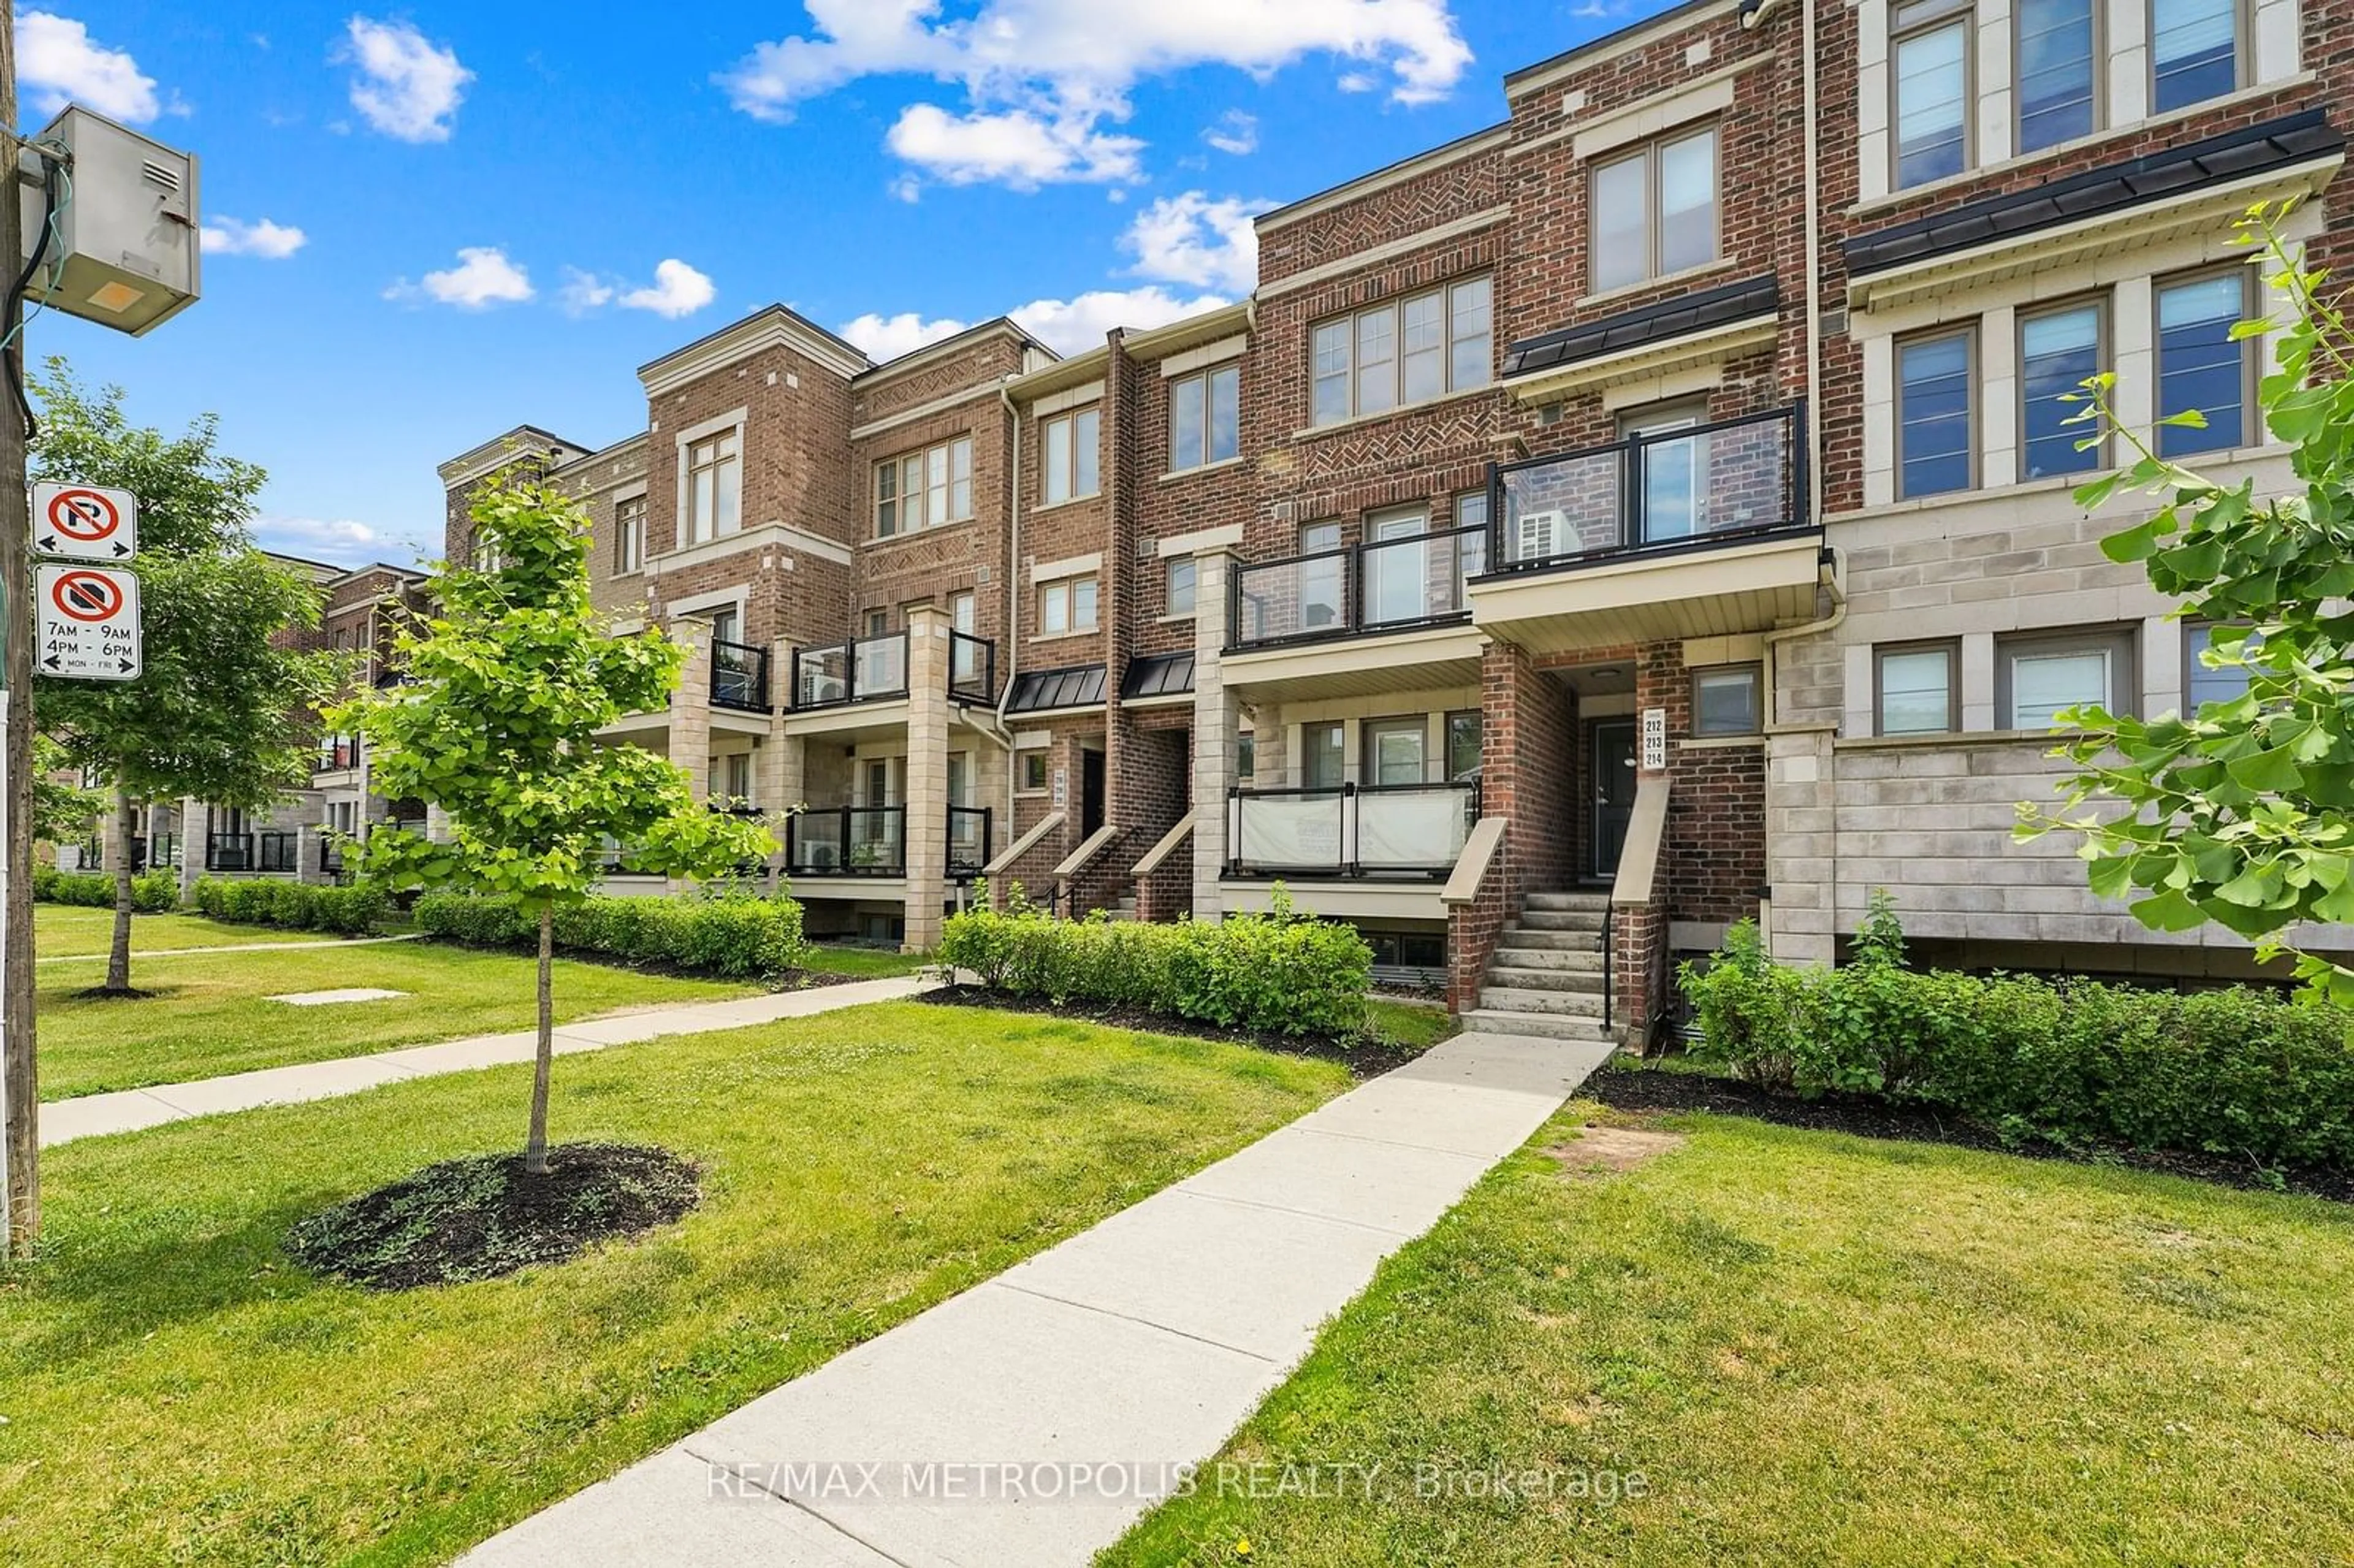 A pic from exterior of the house or condo for 2355 Sheppard Ave #216, Toronto Ontario M9M 0B5